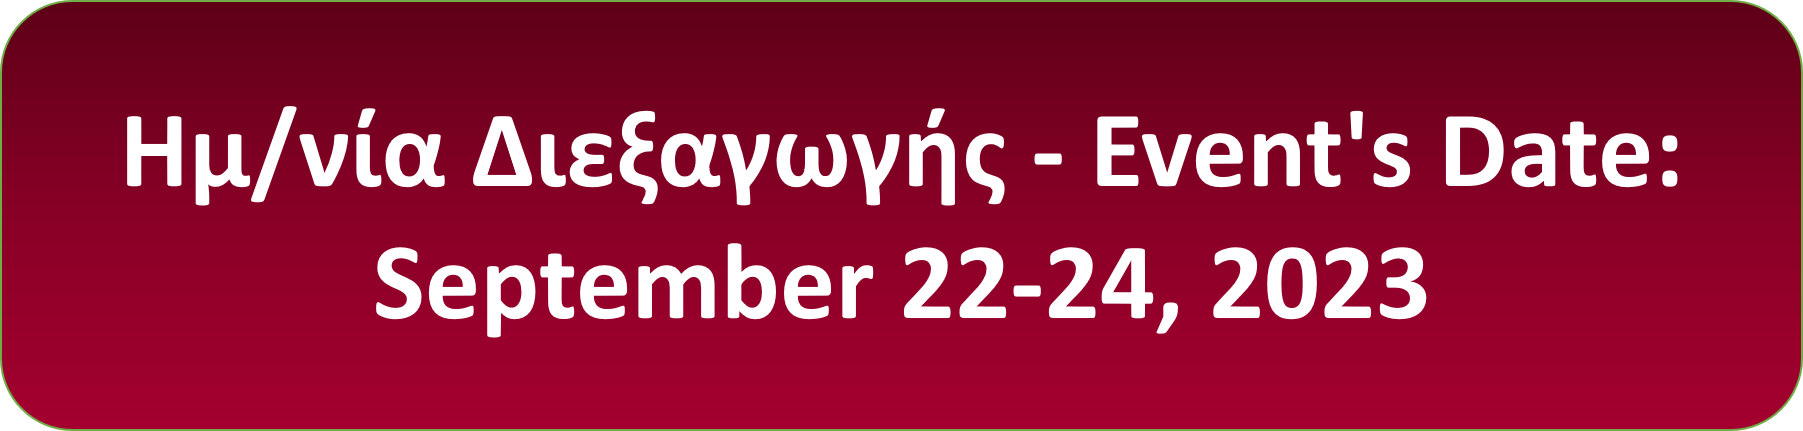 Events_Date_Rethymno_2023.png